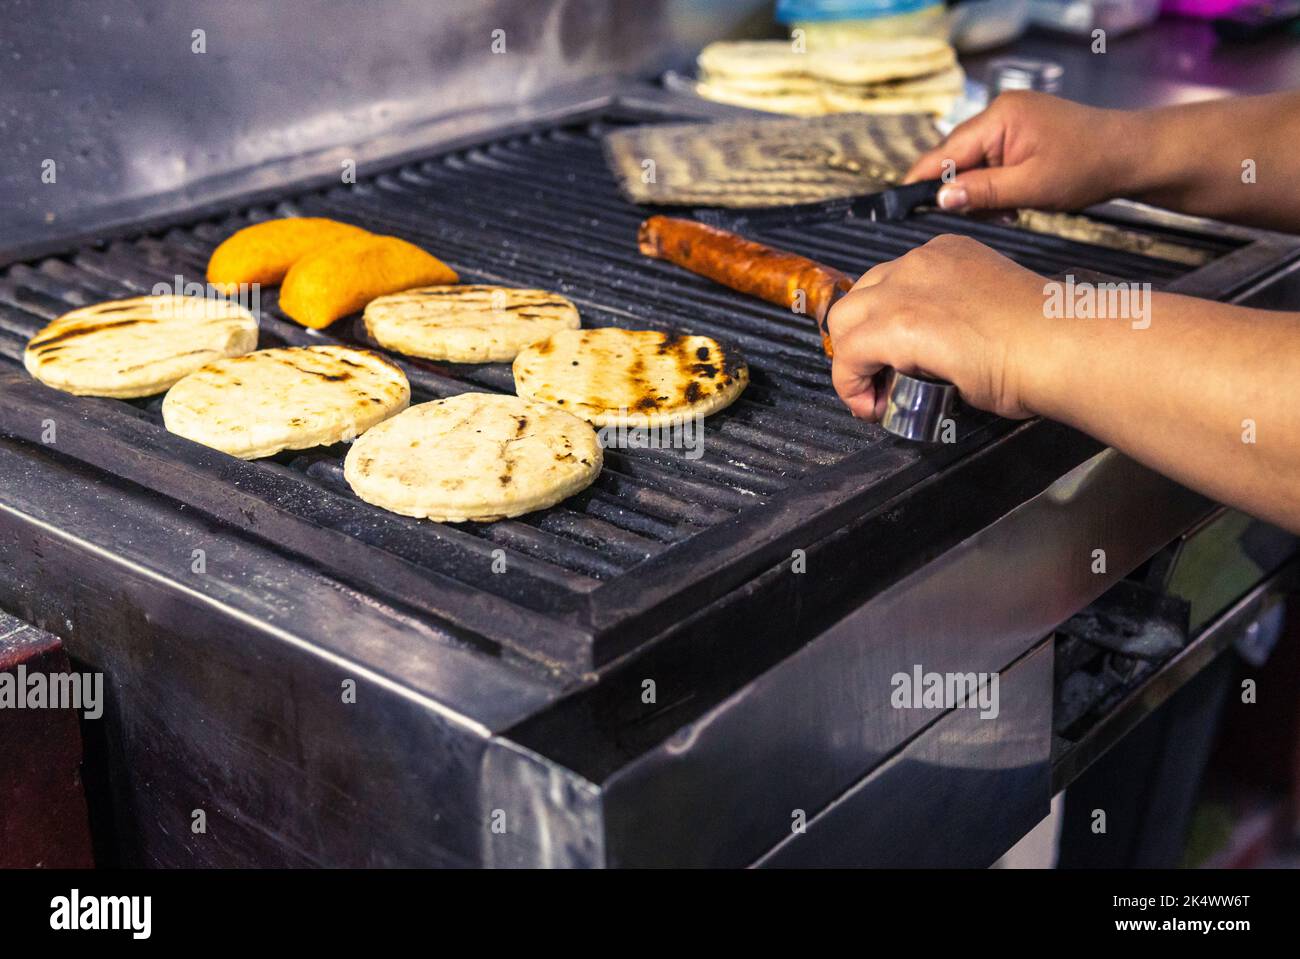 Close-up of a woman's hands cutting a chorizo and preparing Colombian arepas and empanadas on a charcoal grill Stock Photo